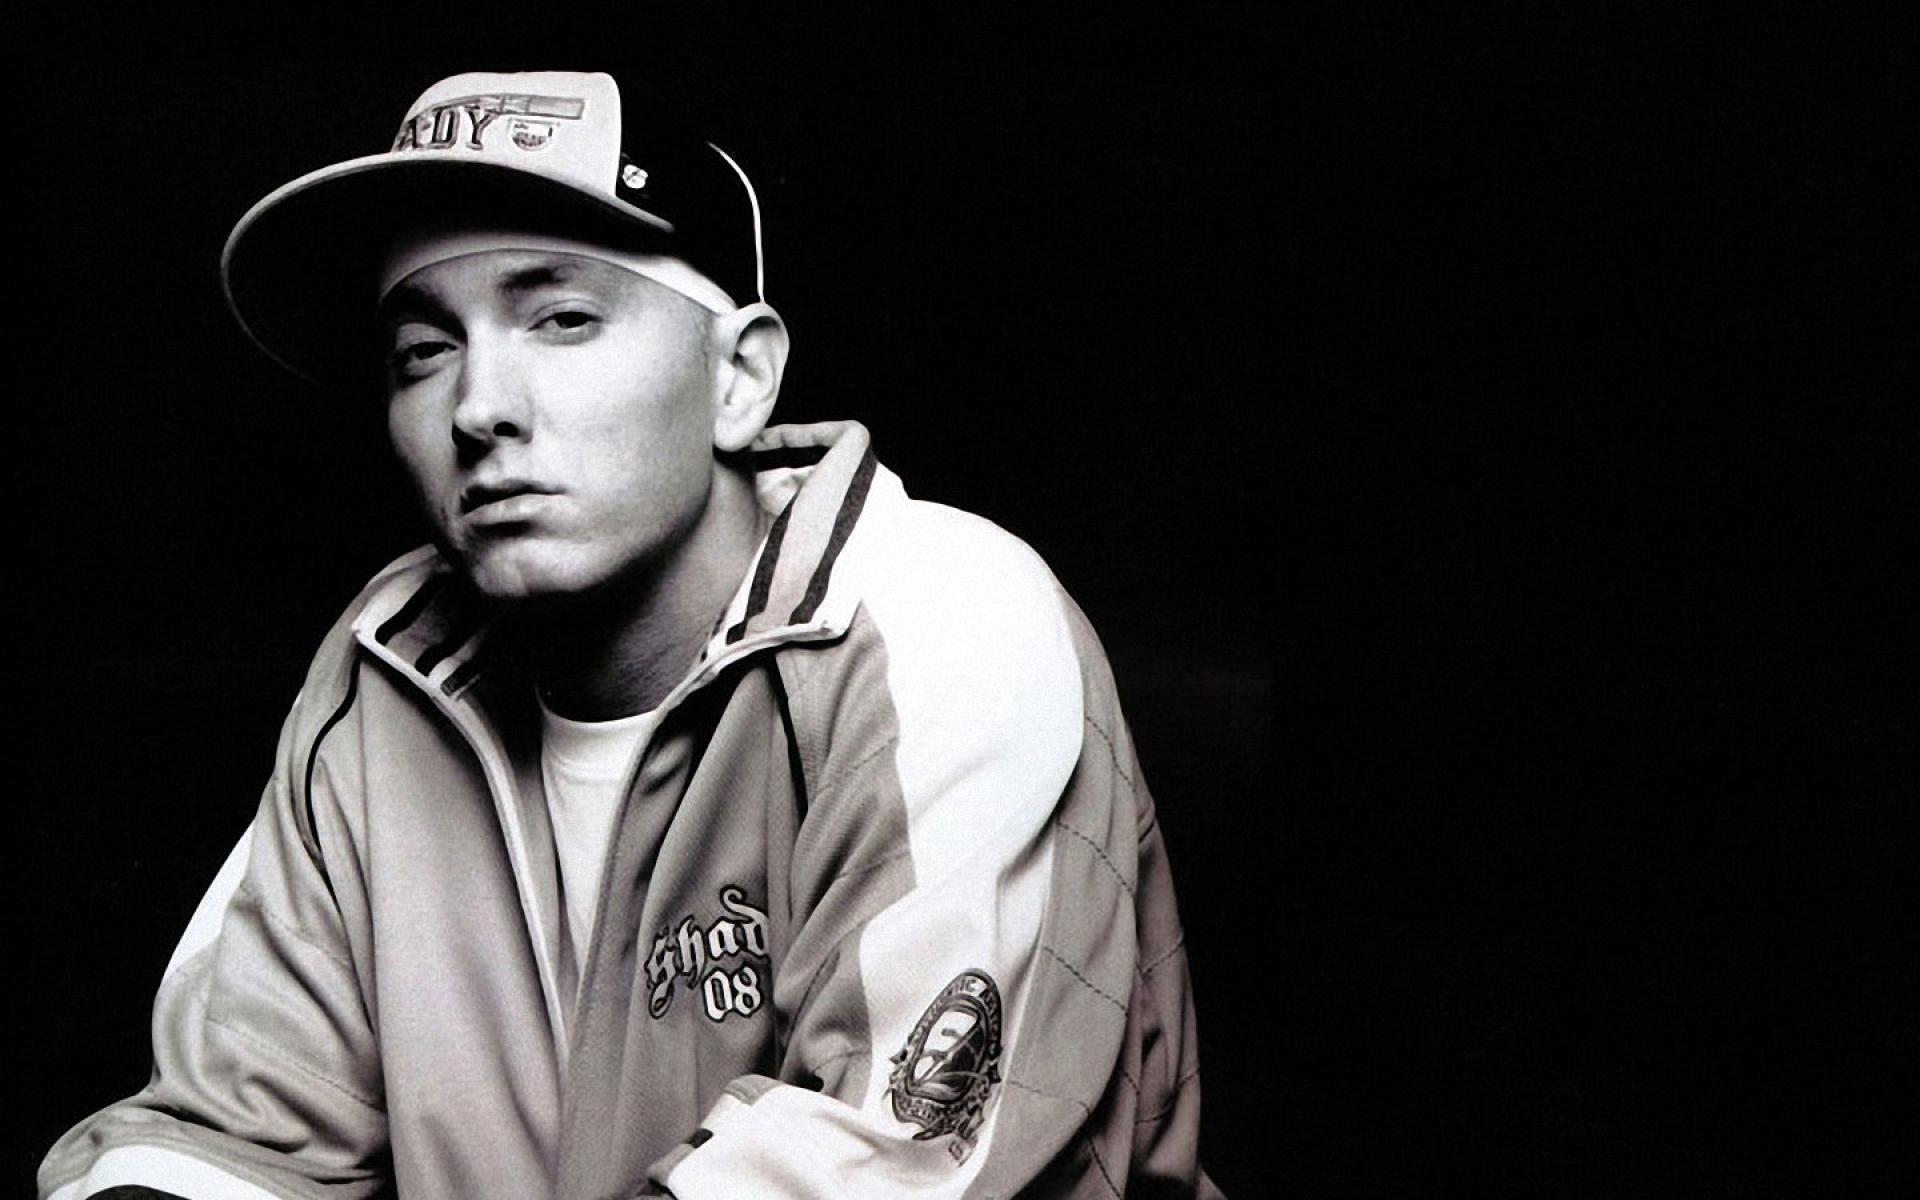 Widescreen Wallpaper of Eminem download for free